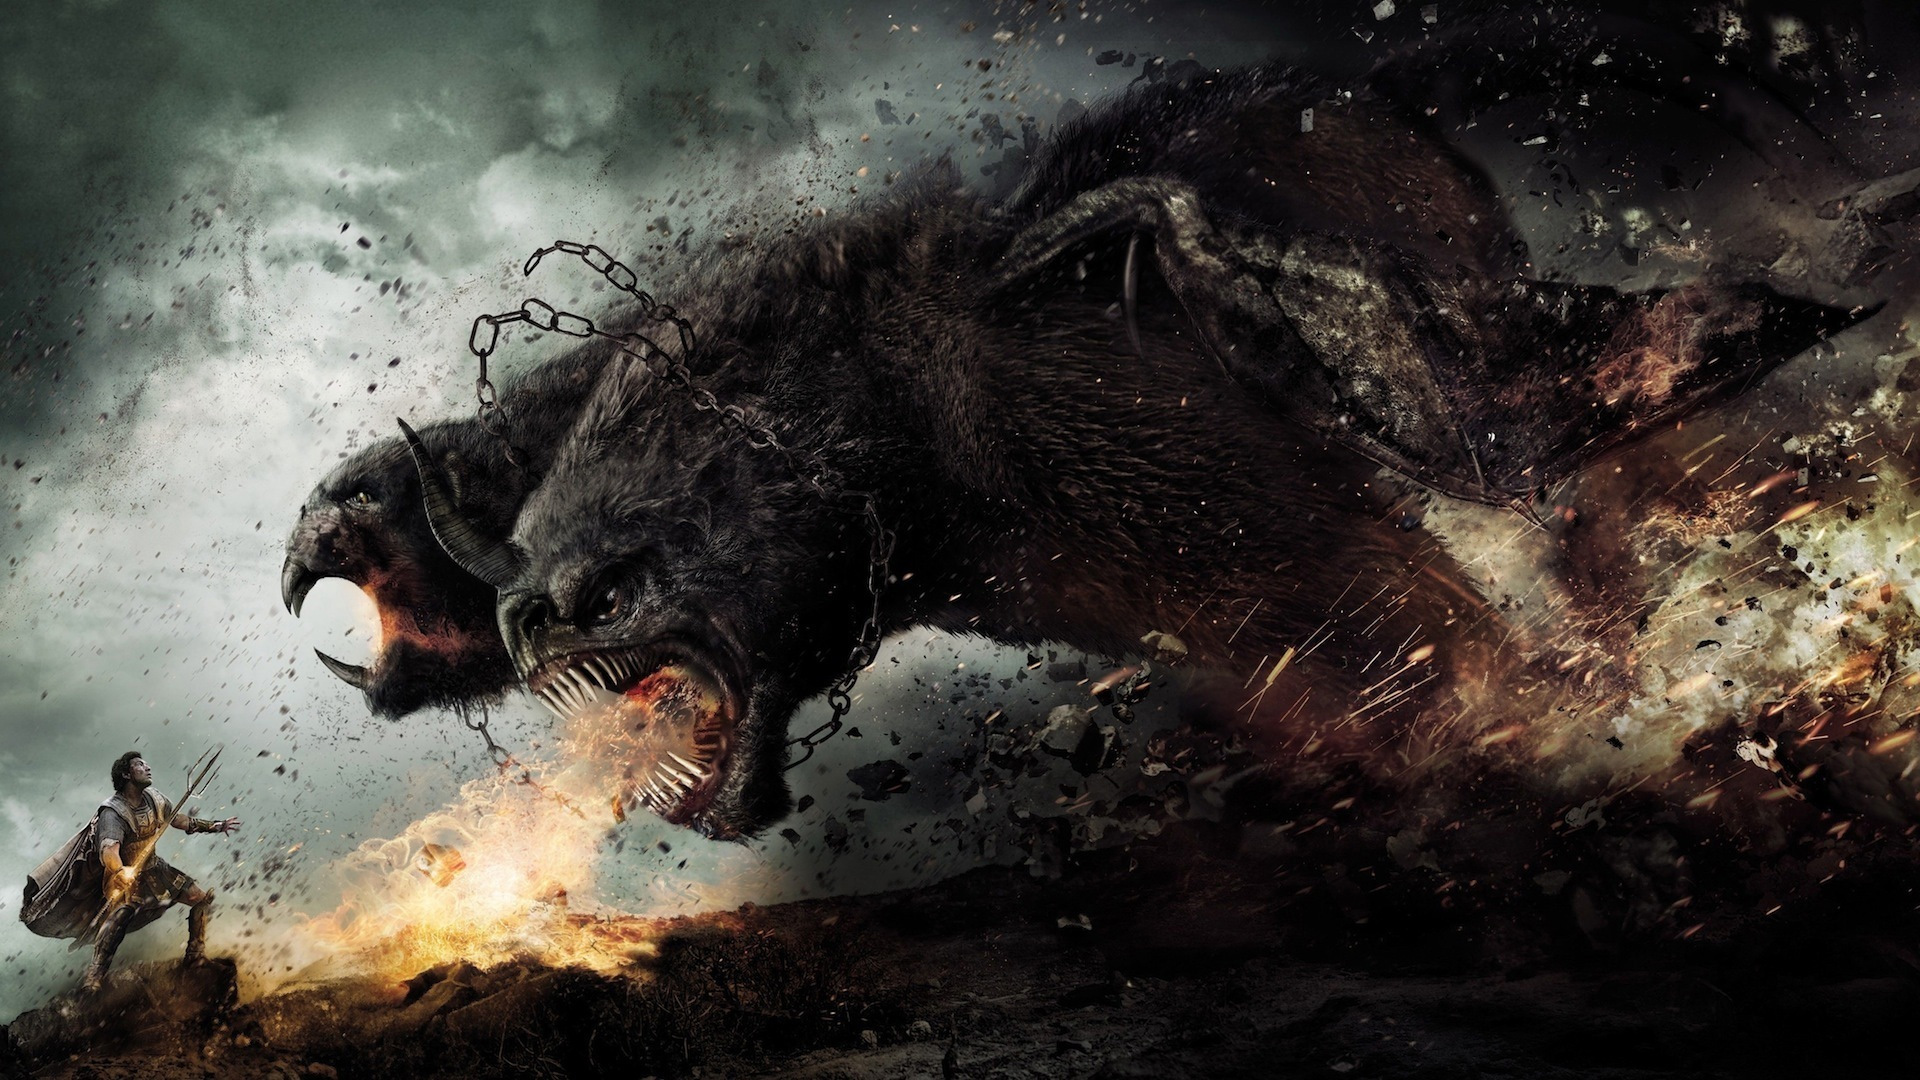 Desktop Wallpaper Wrath Of The Titans, Movie, Creature, Fight, Hd Image,  Picture, Background, Ucydzf